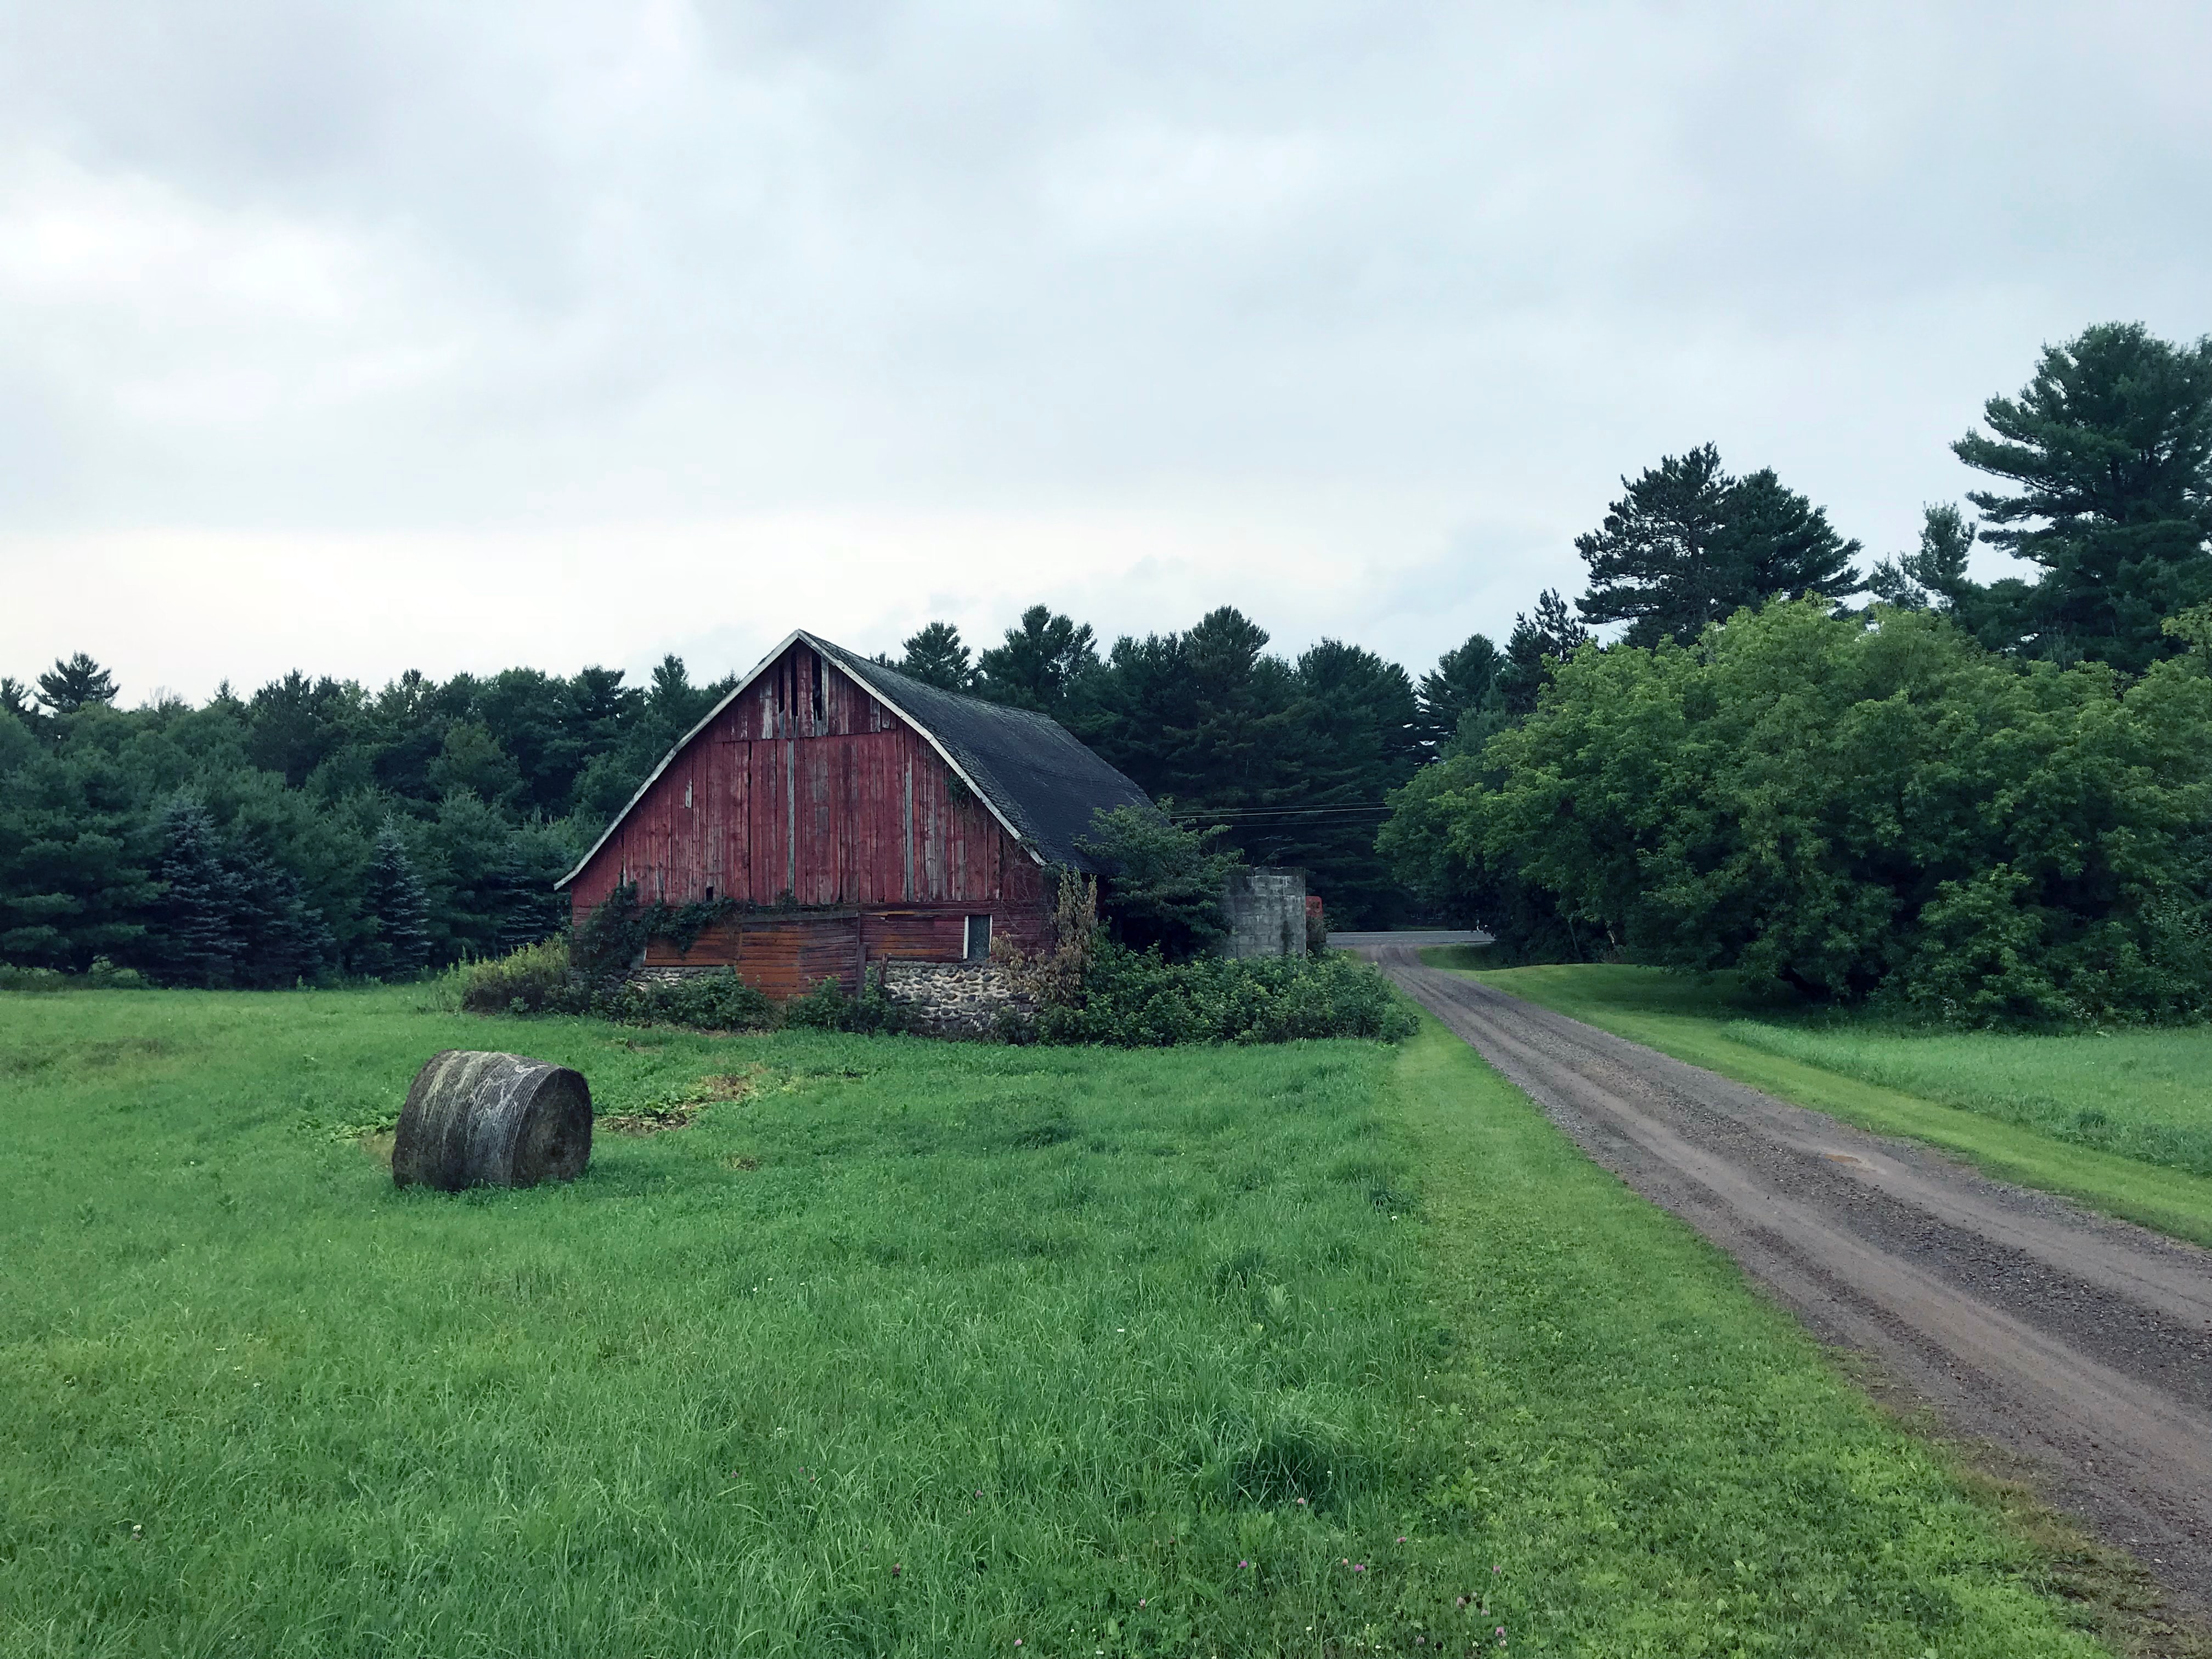 An old red barn along a dirt road.